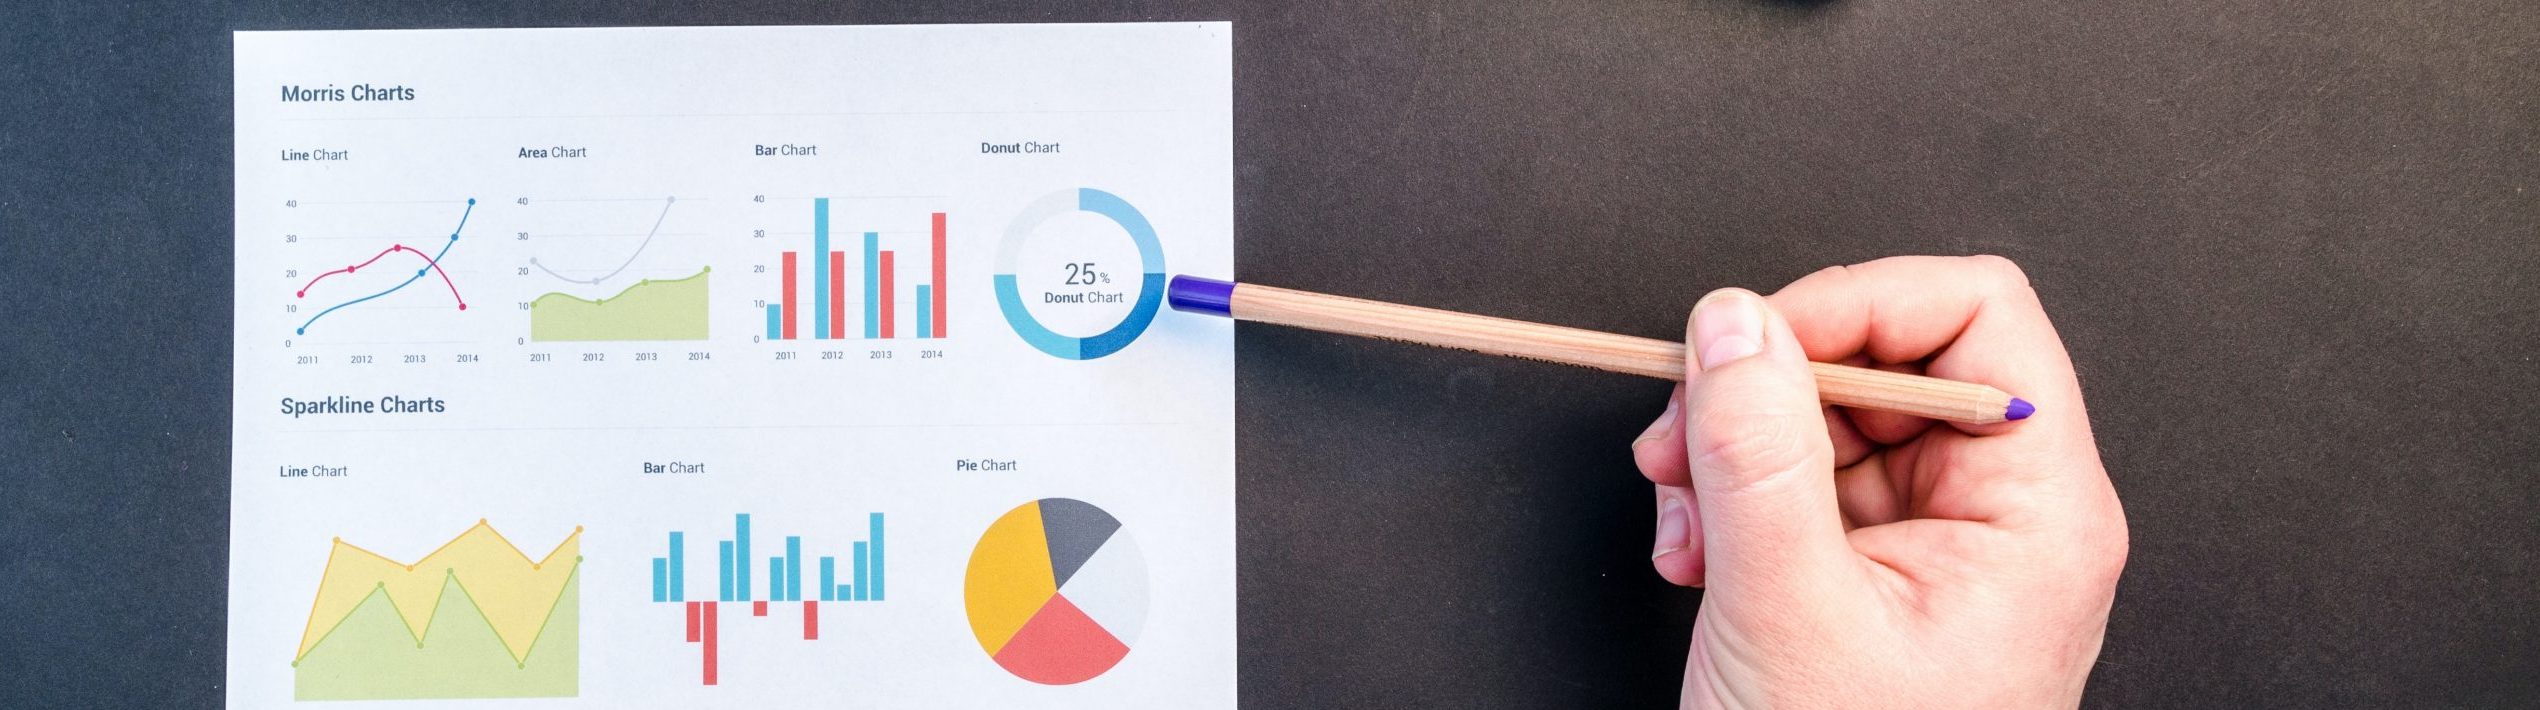 Image of a person's hand holding a pencil pointing to various data sources on a chart.